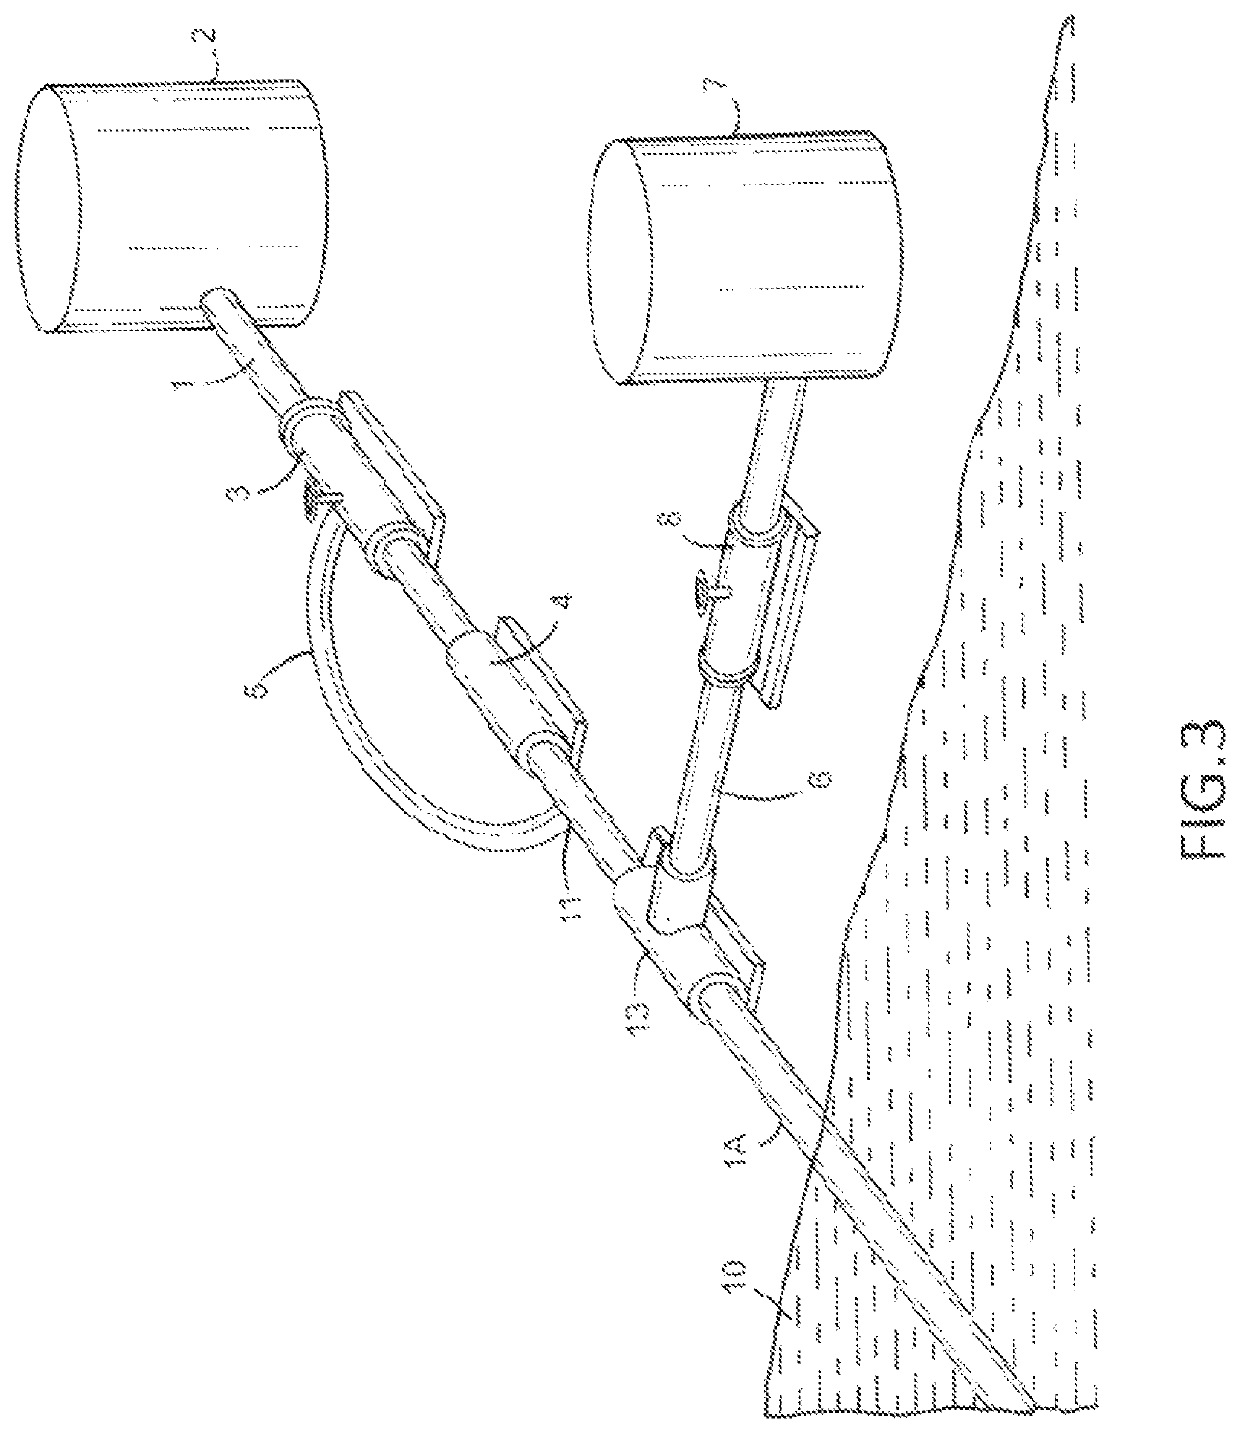 Method for preventing spills resulting from pipeline failures